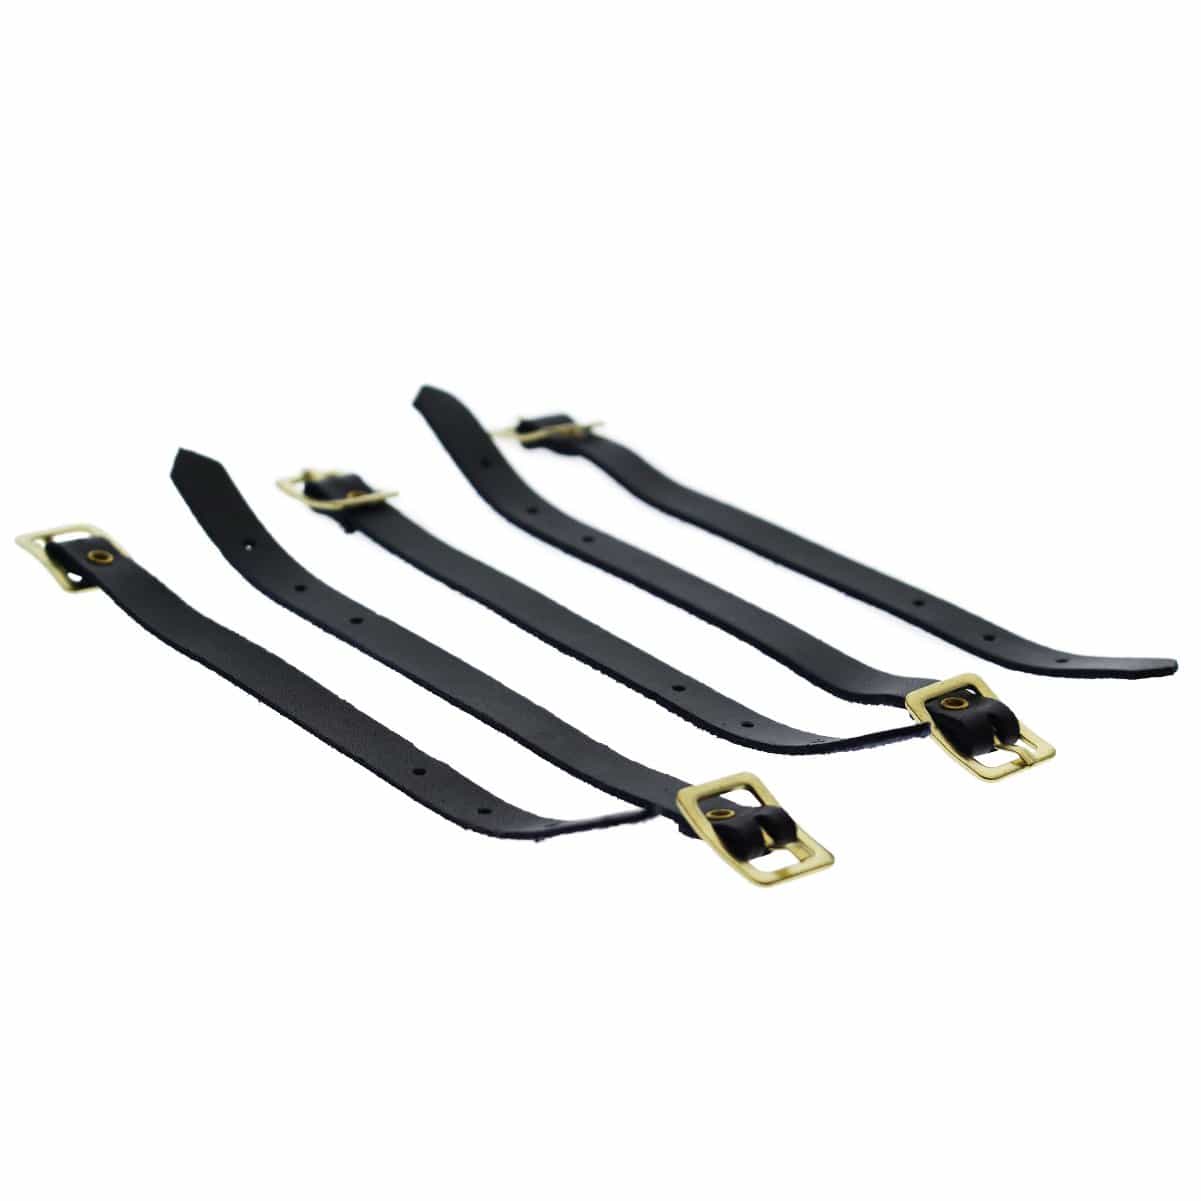 Black Genuine Leather Luggage Strap W/ Brass-Plated Buckle, 3 Holes  2420-1041